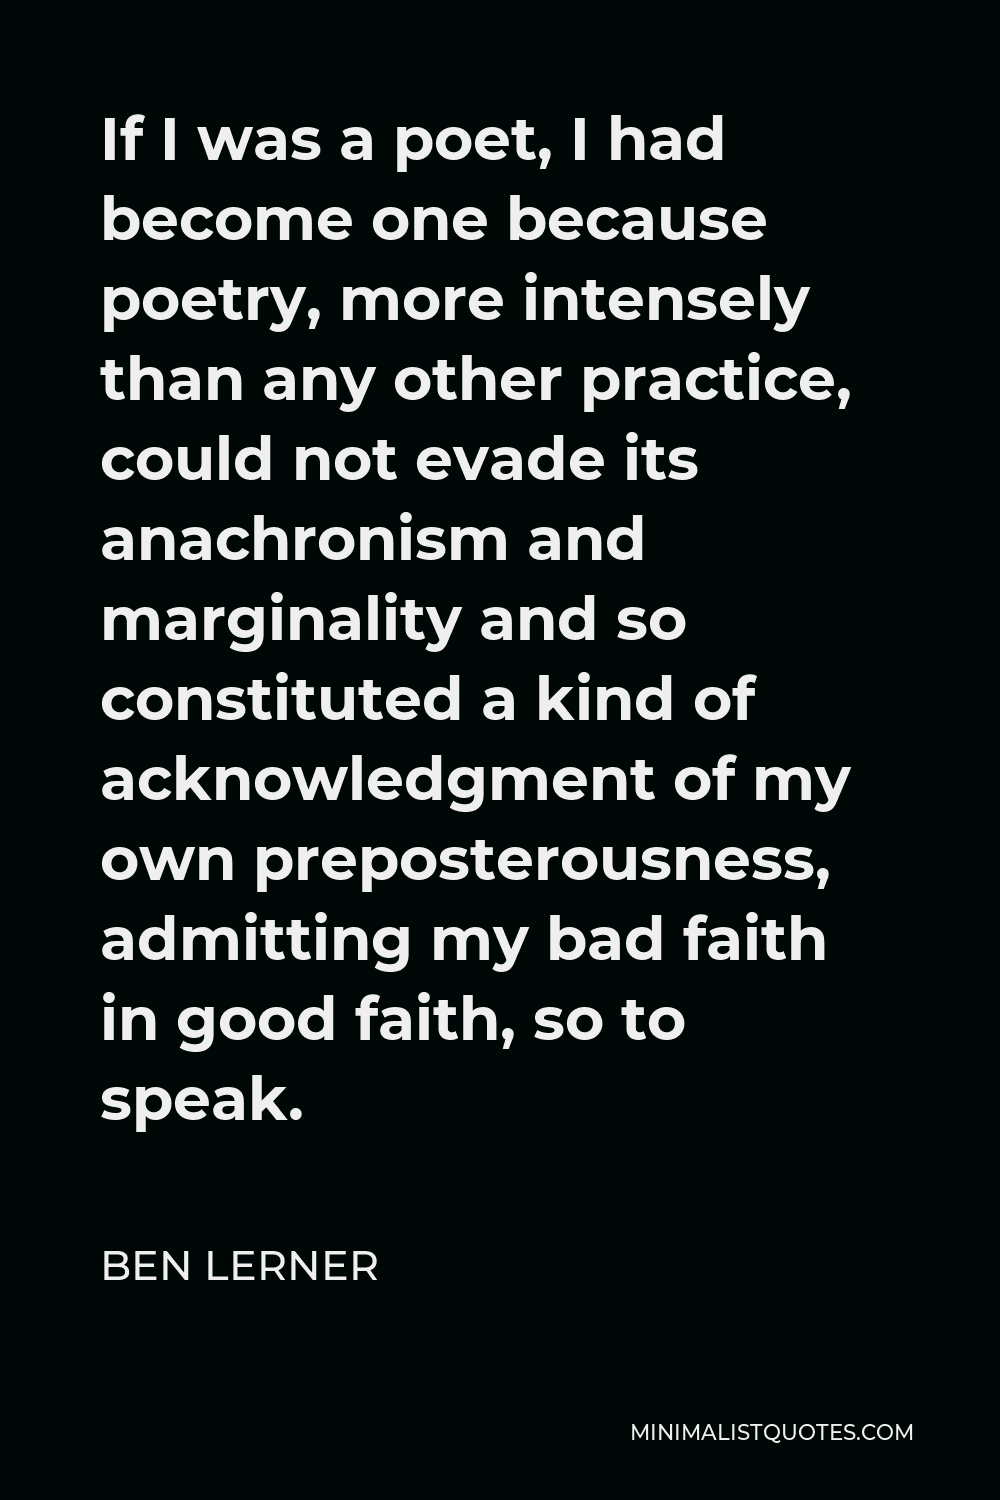 Ben Lerner Quote - If I was a poet, I had become one because poetry, more intensely than any other practice, could not evade its anachronism and marginality and so constituted a kind of acknowledgment of my own preposterousness, admitting my bad faith in good faith, so to speak.